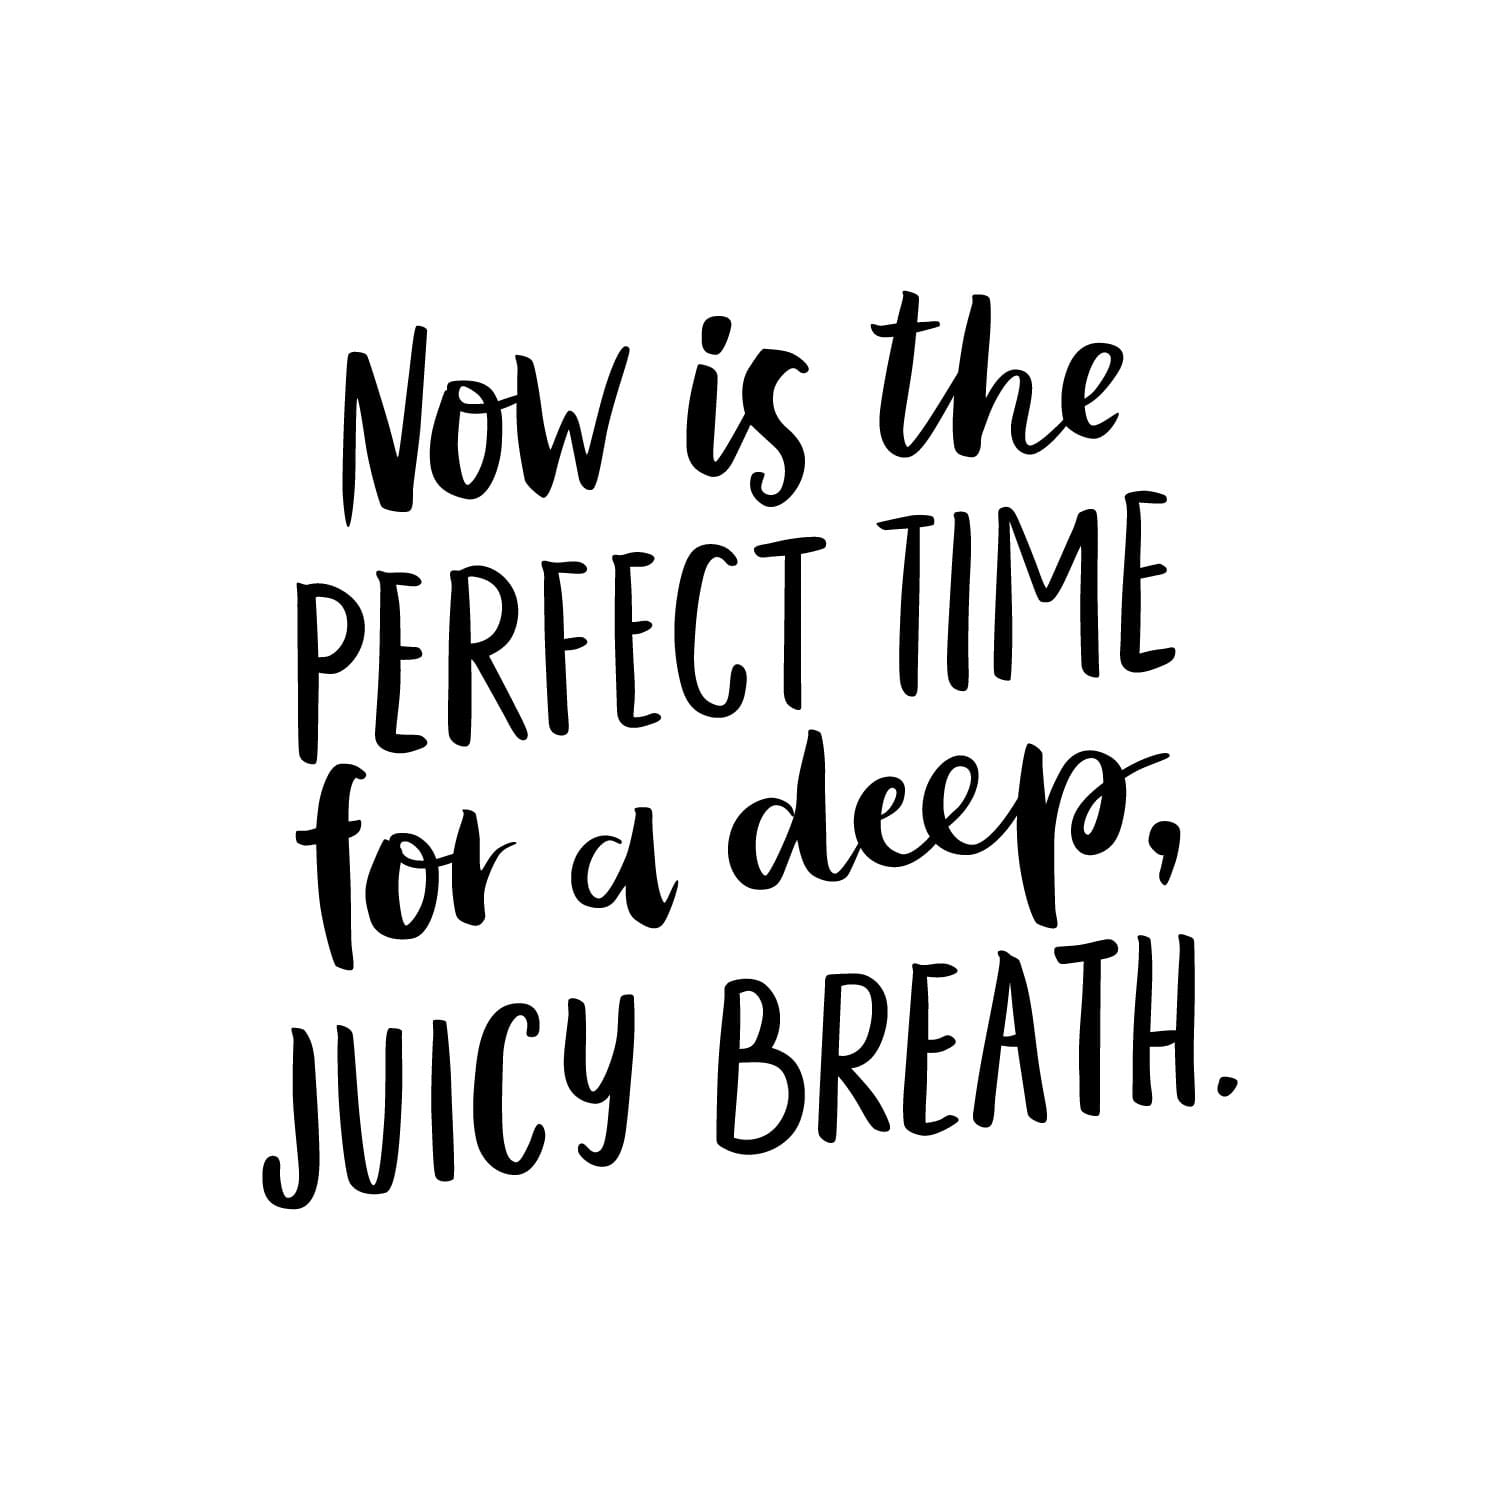 Now is the perfect time for a deep juicy breath